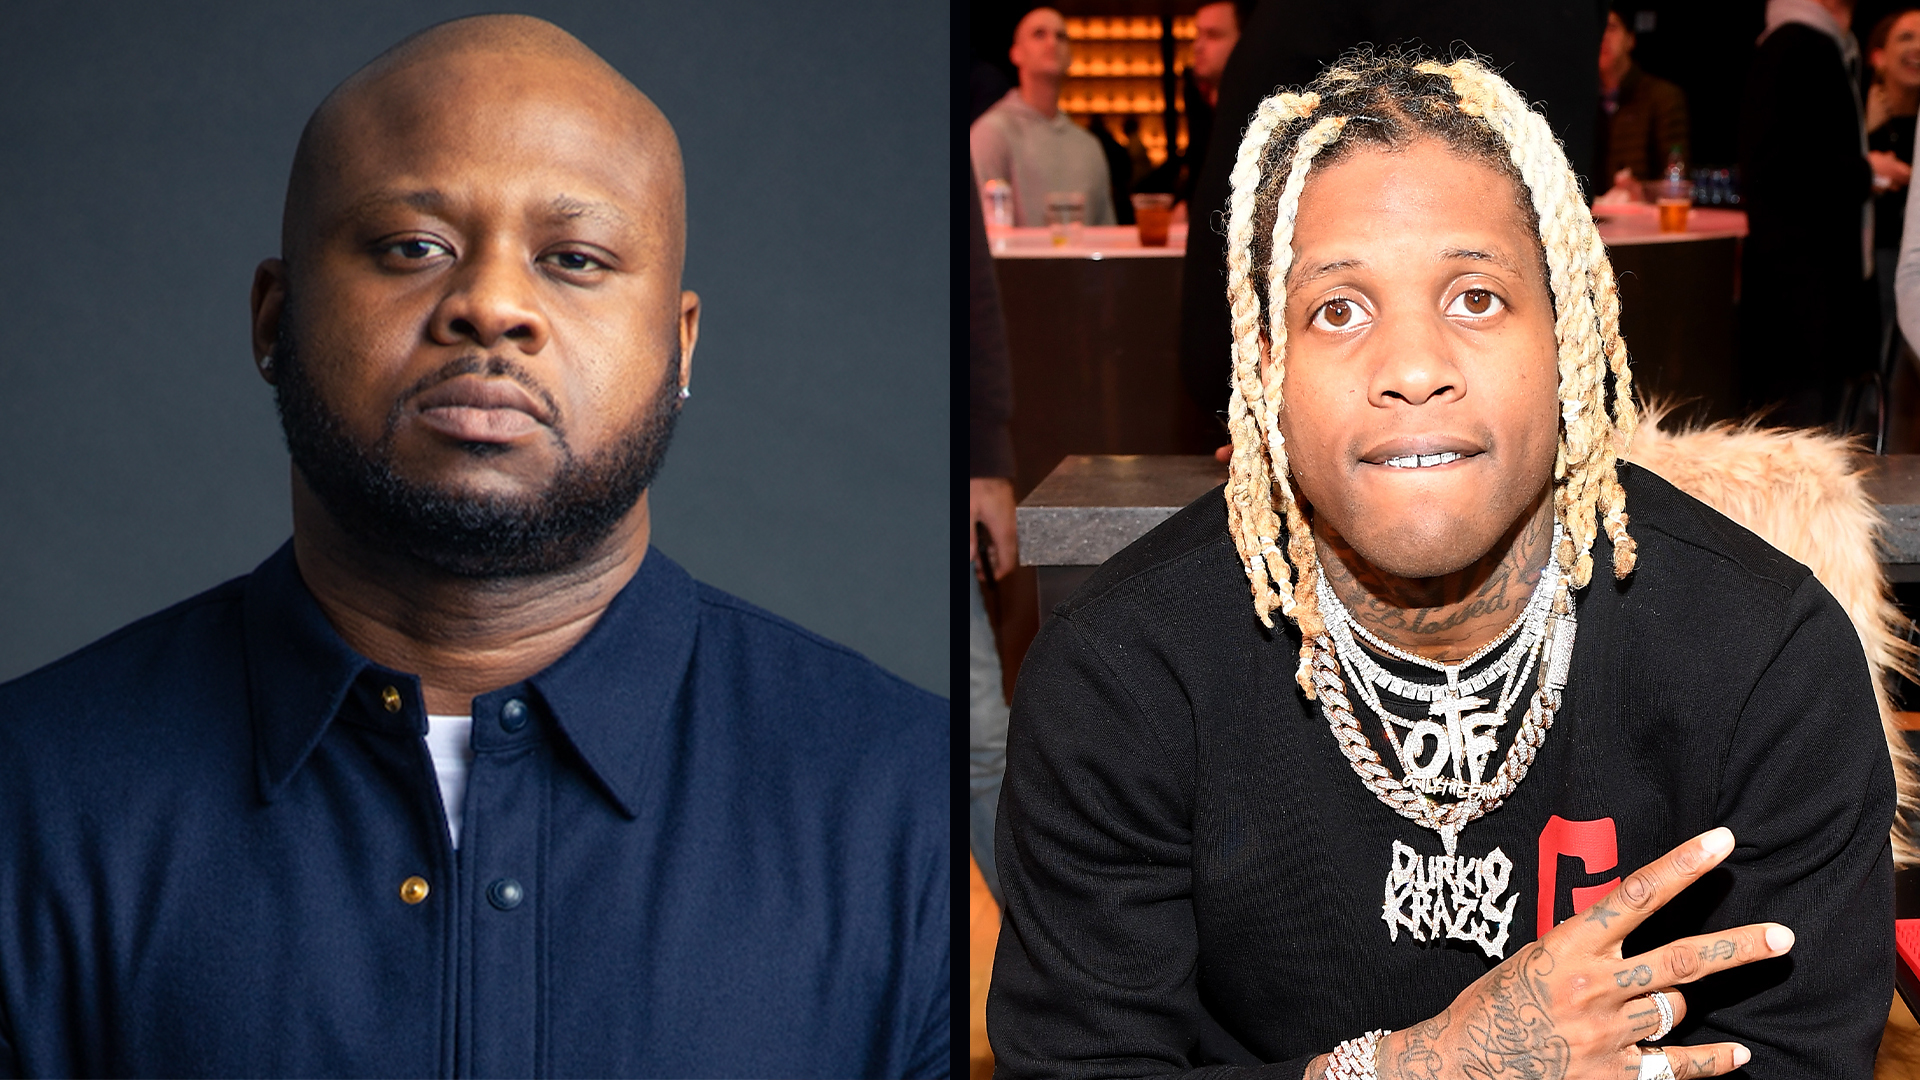 OTF Manager Ola Ali Is Helping Artists Like Lil Durk Bridge The Gap Between Hip-Hop And Gaming